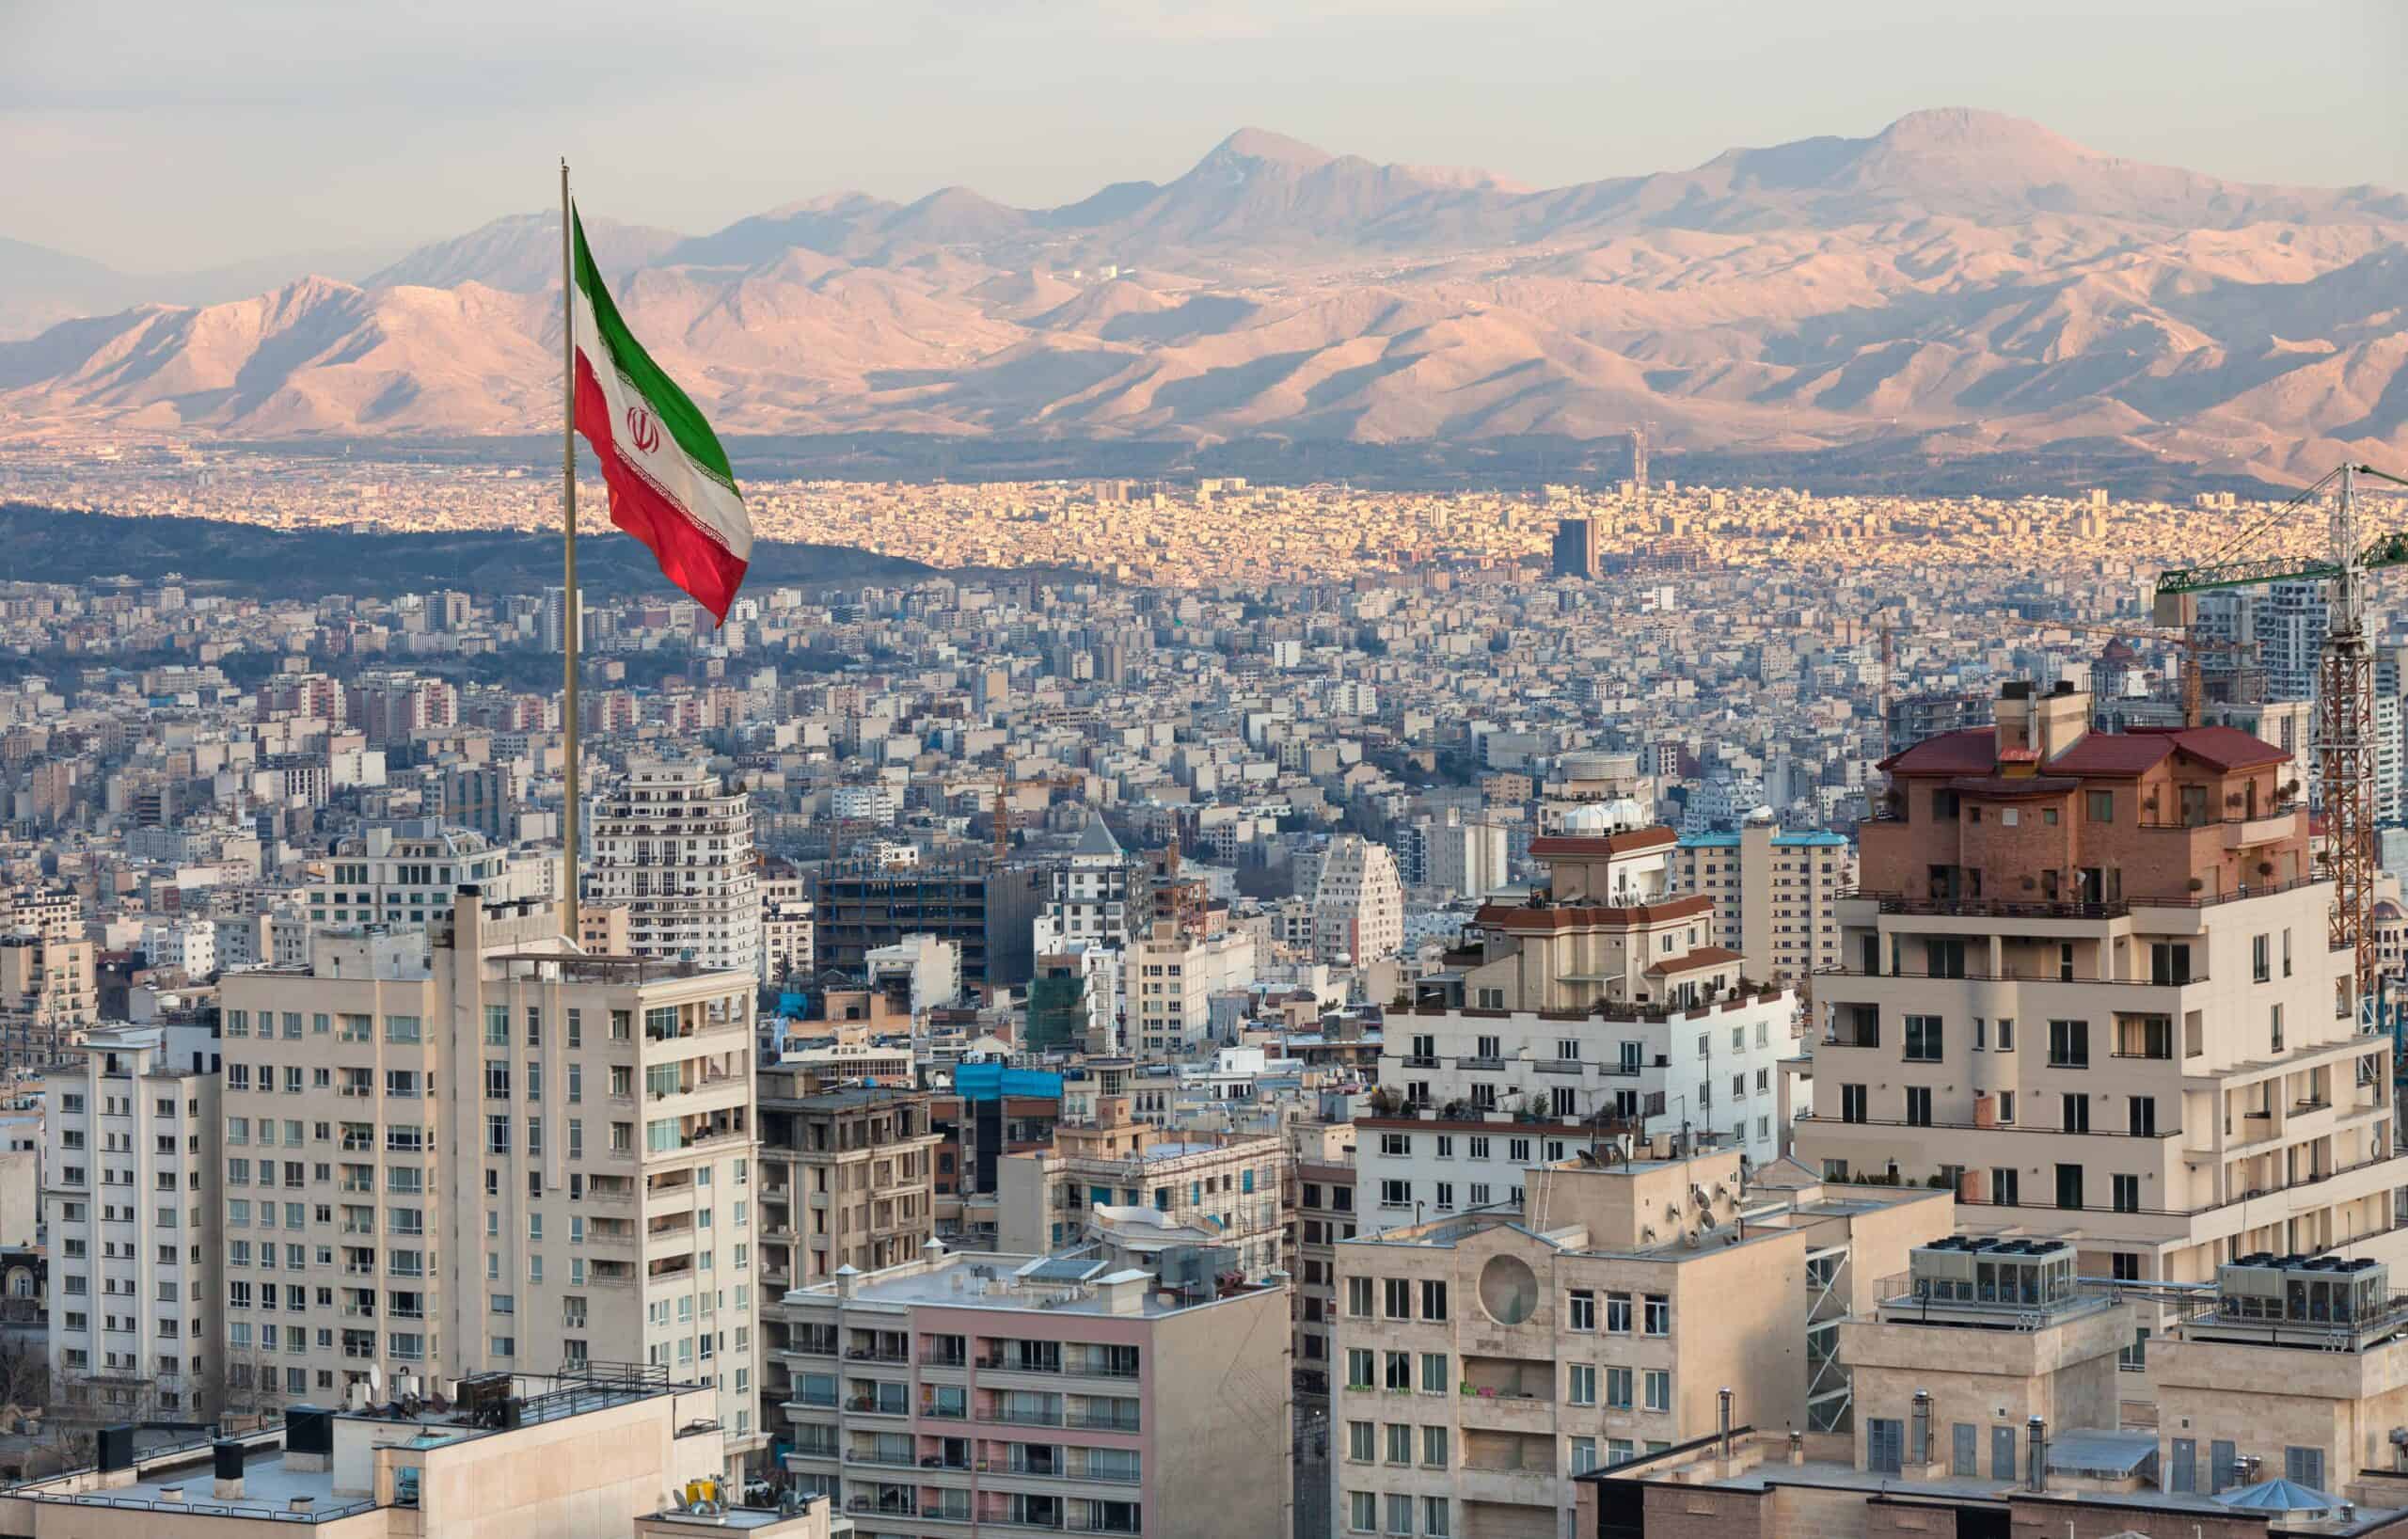 Iran | Aerial view of Tehran Skyline at Sunset with Large Iran Flag Waving in the Wind